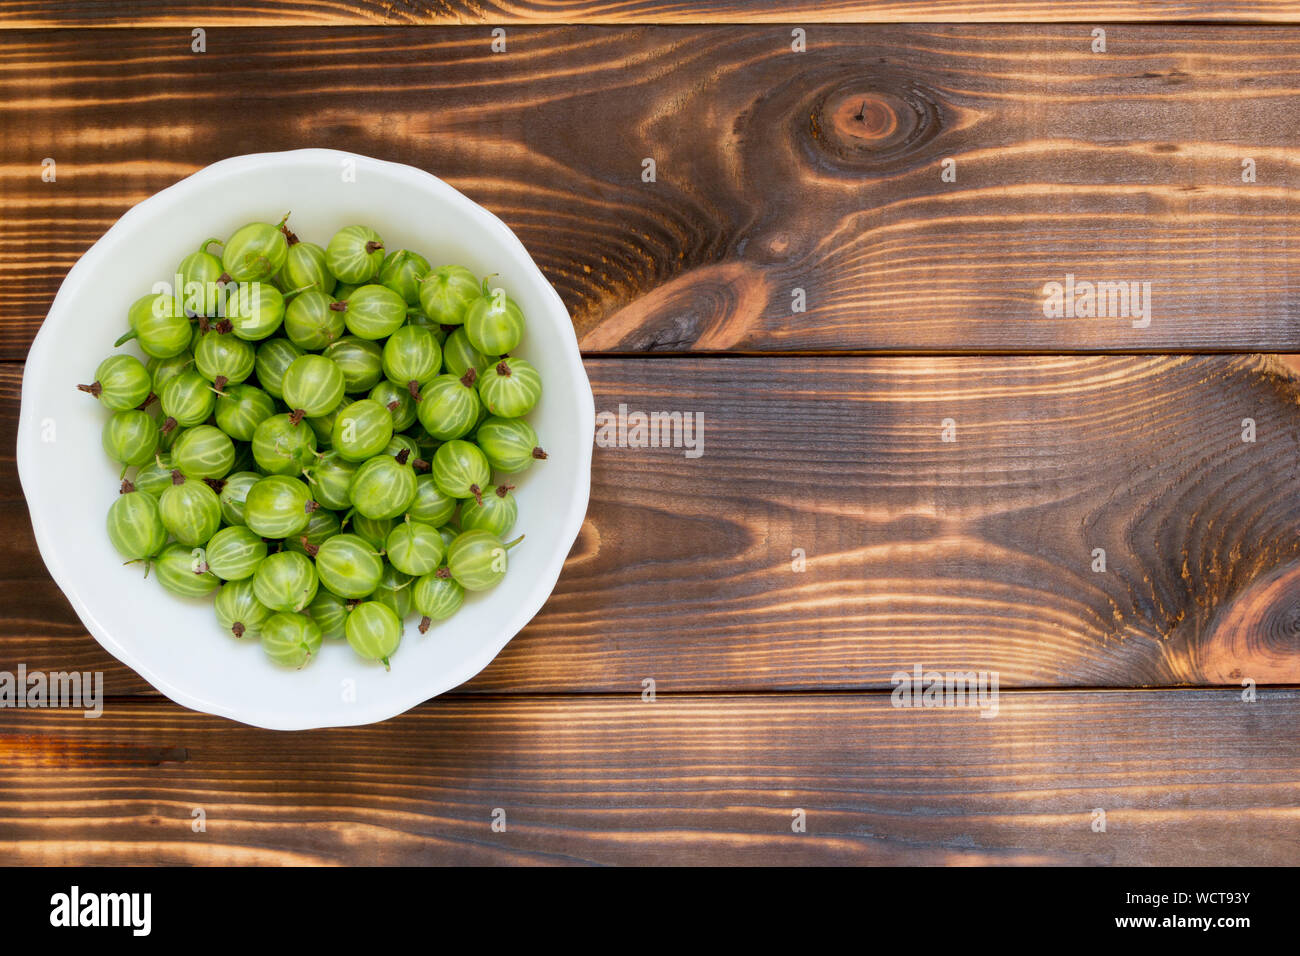 Green gooseberries on dark wooden table with copy space. Flat lay. Berries in white bowl at left side of image. Snack for raw diet. Natural homegrown Stock Photo